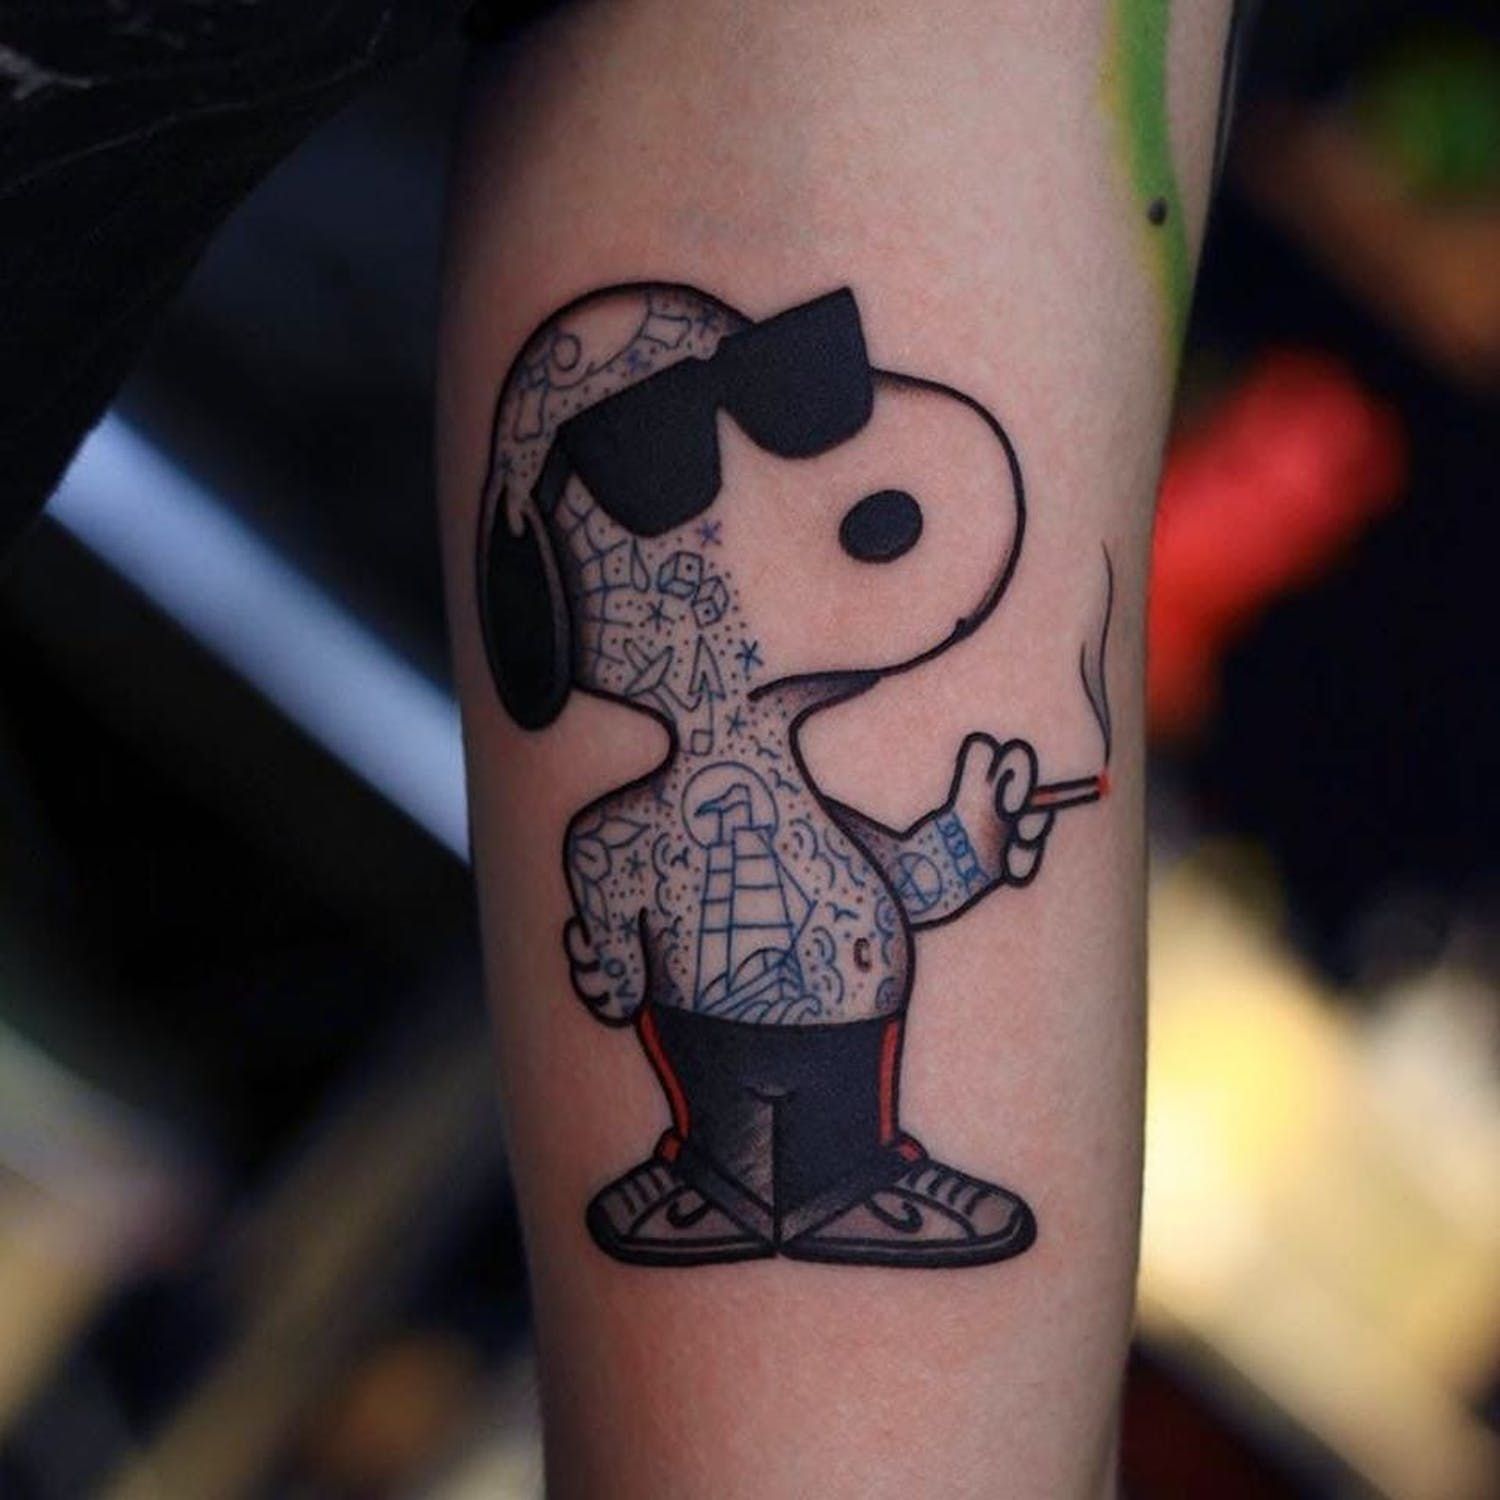 Snoopy and woodstock tattoo on the hand